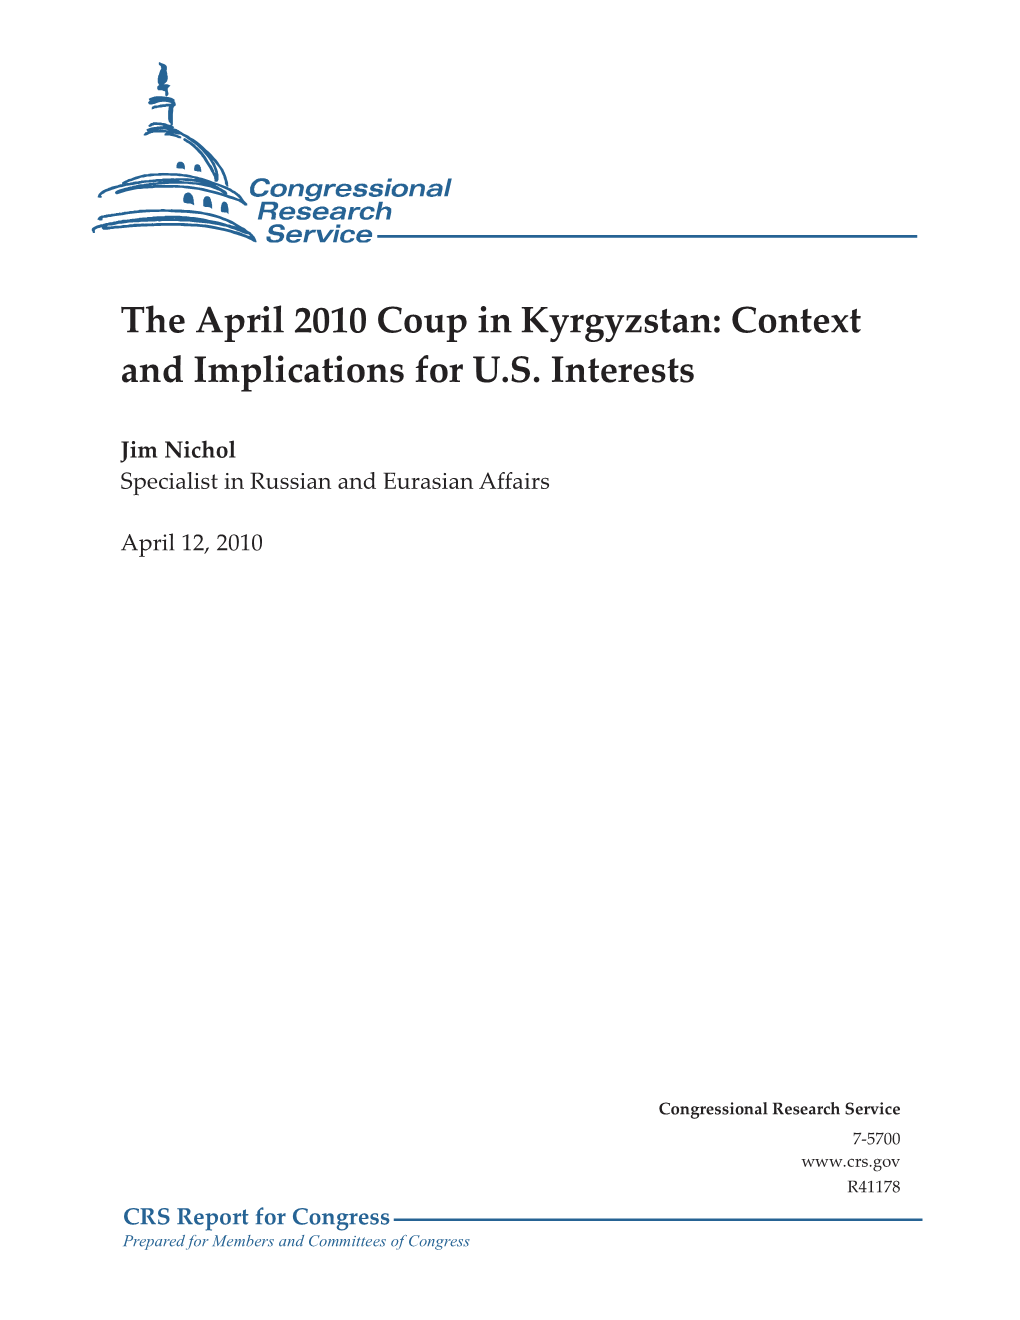 The April 2010 Coup in Kyrgyzstan: Context and Implications for U.S. Interests